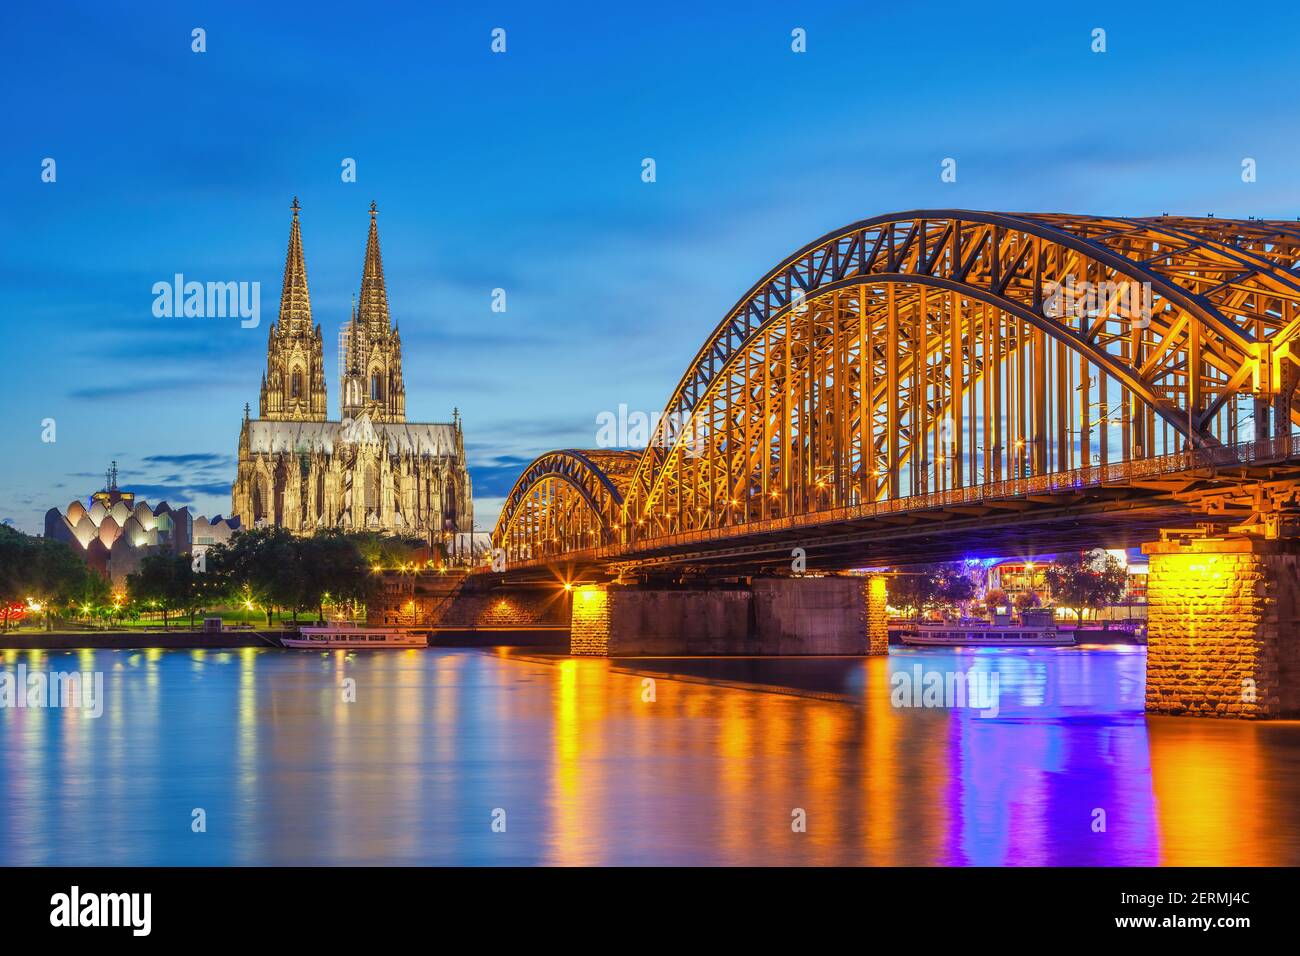 Cologne Germany, night city skyline at Cologne Cathedral (Cologne Dom) Stock Photo